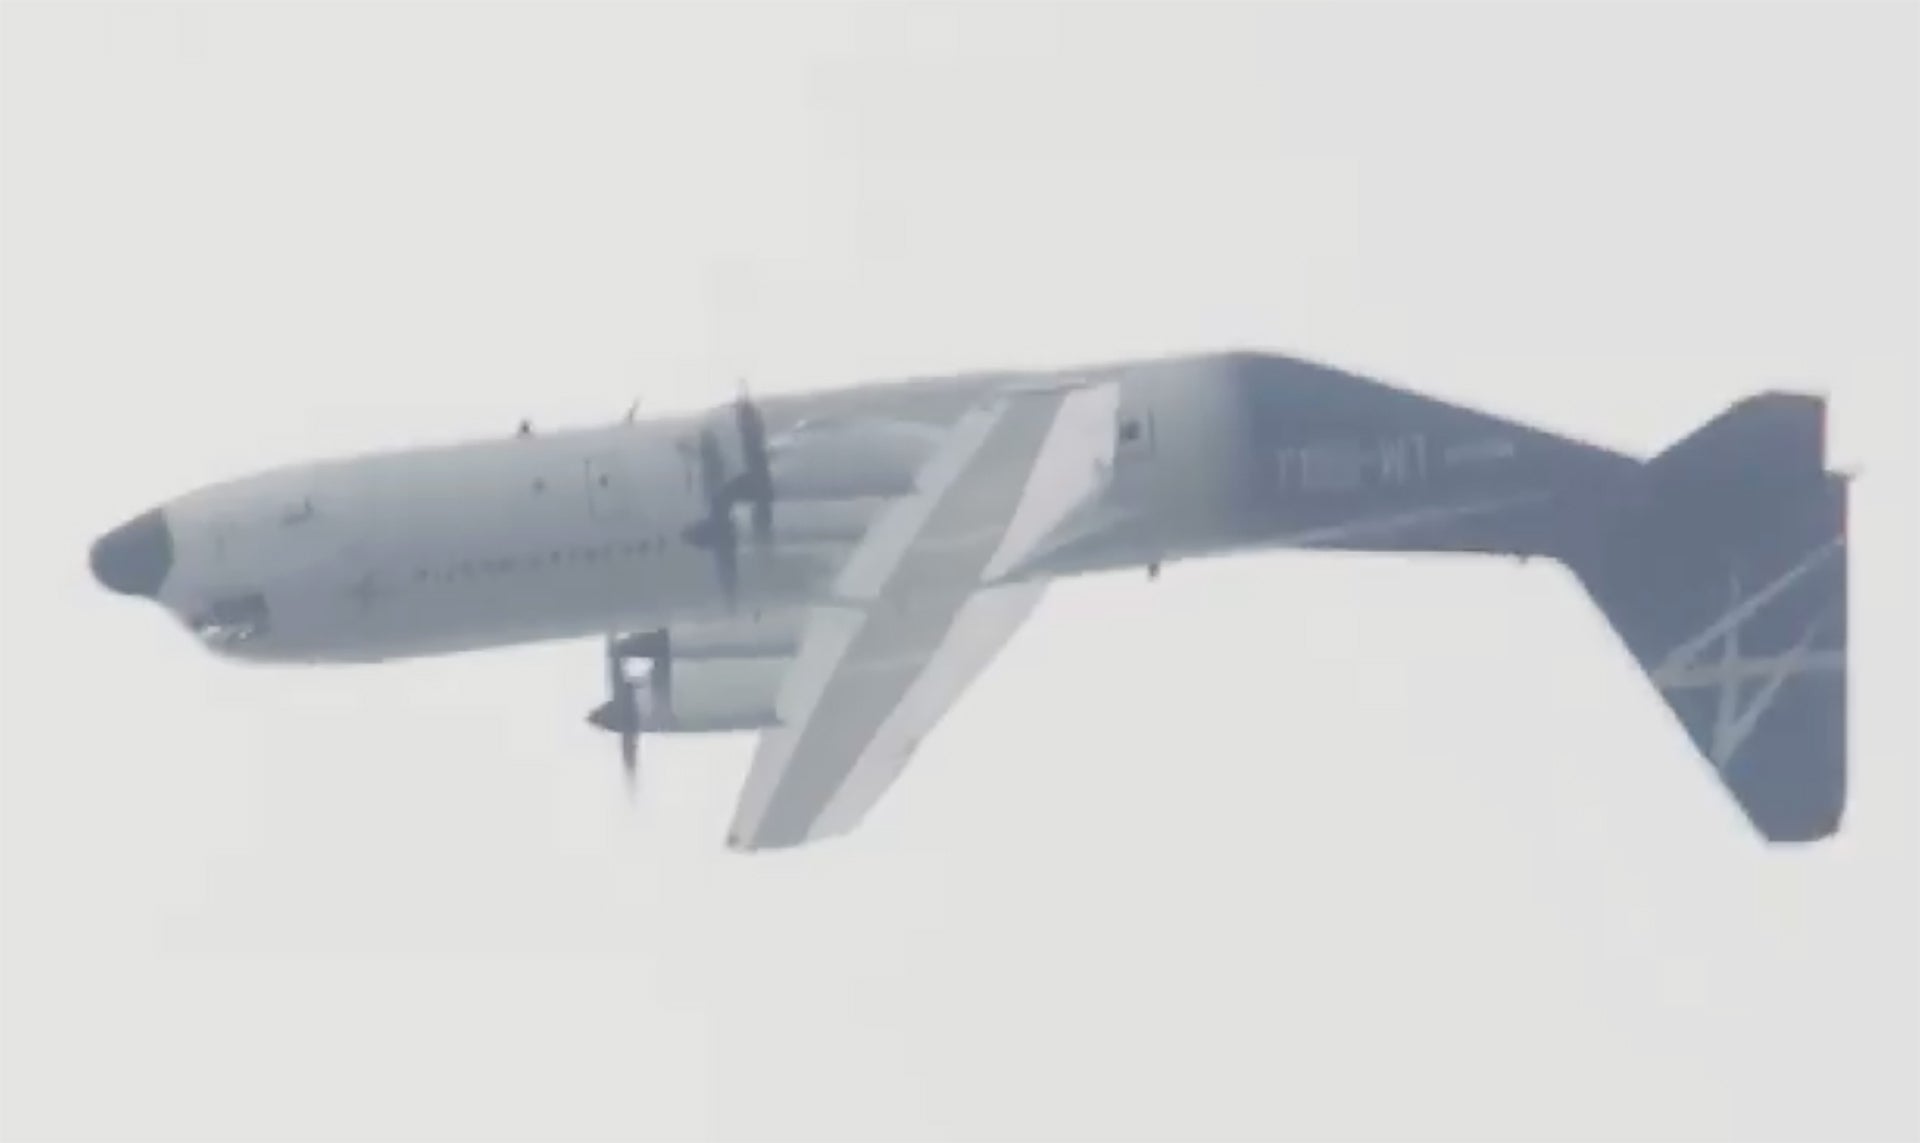 Forget The Fighters, Lockheed’s LM-100J Super Hercules Demo Slayed At Farnborough